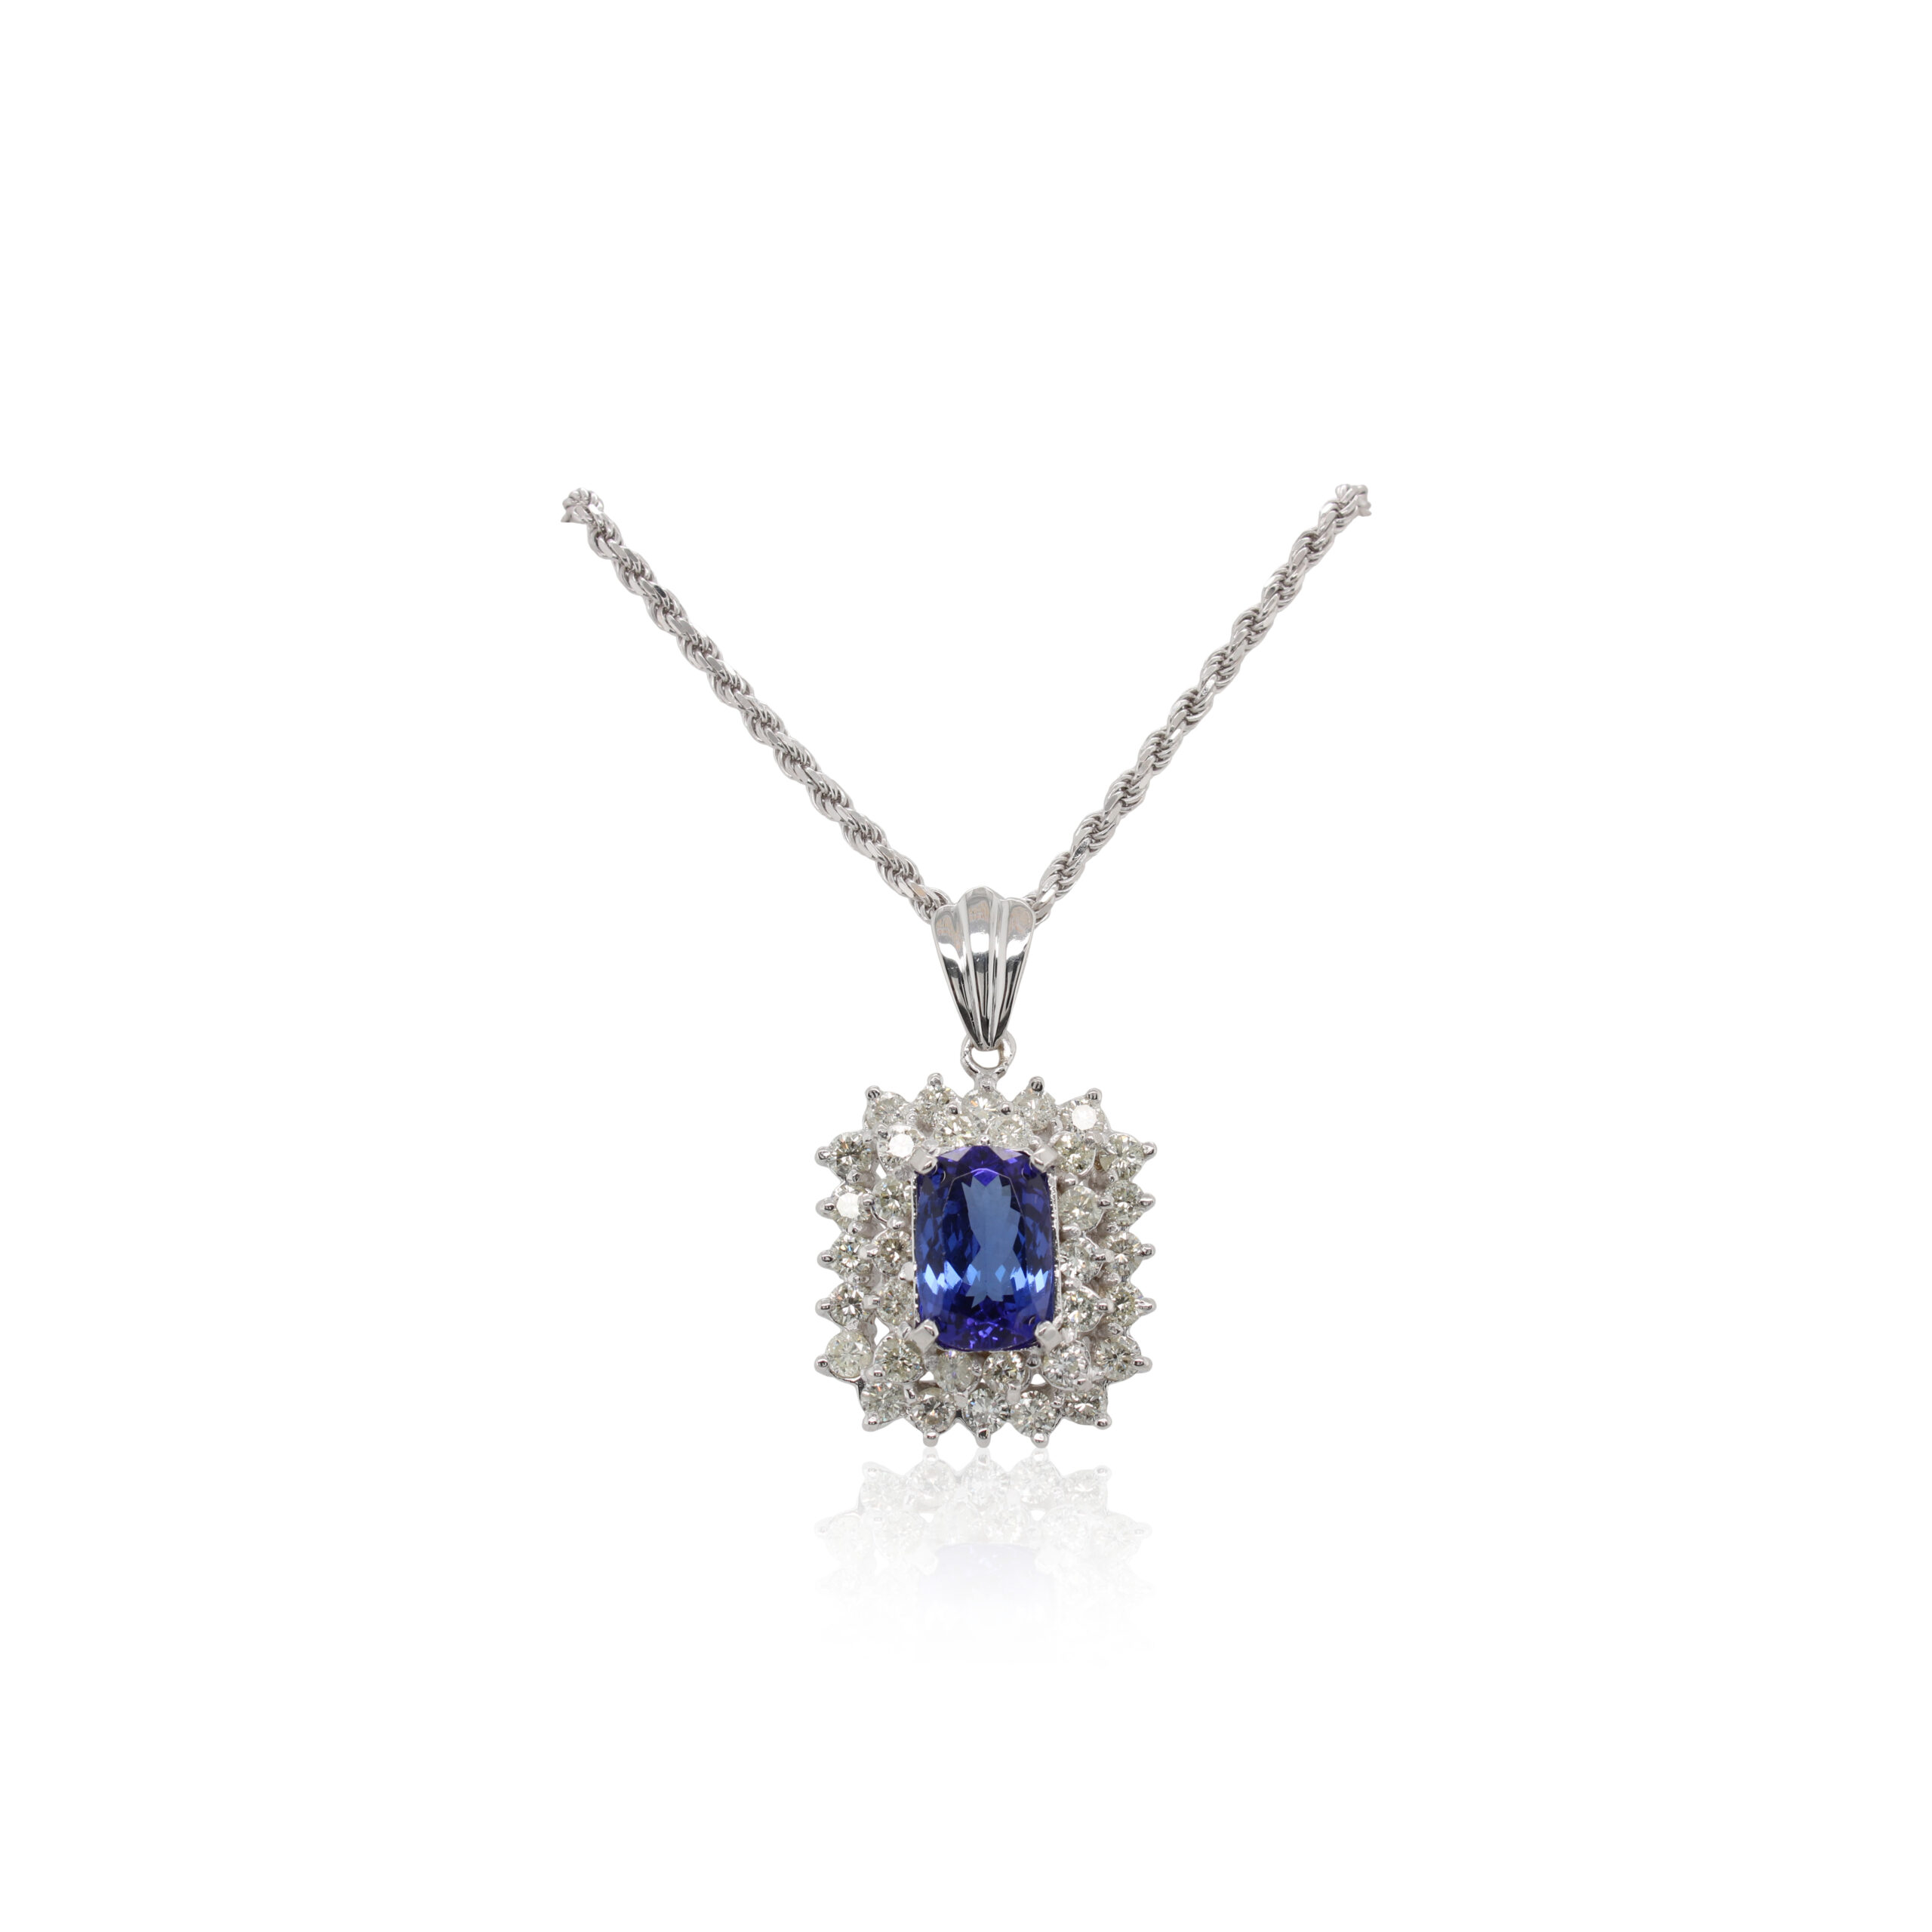 This necklace is crafted from 18k white gold and features an antique cushion tanzanite and 3.40 total carats of diamonds around the double halos. This piece includes a 14k white gold rope chain.